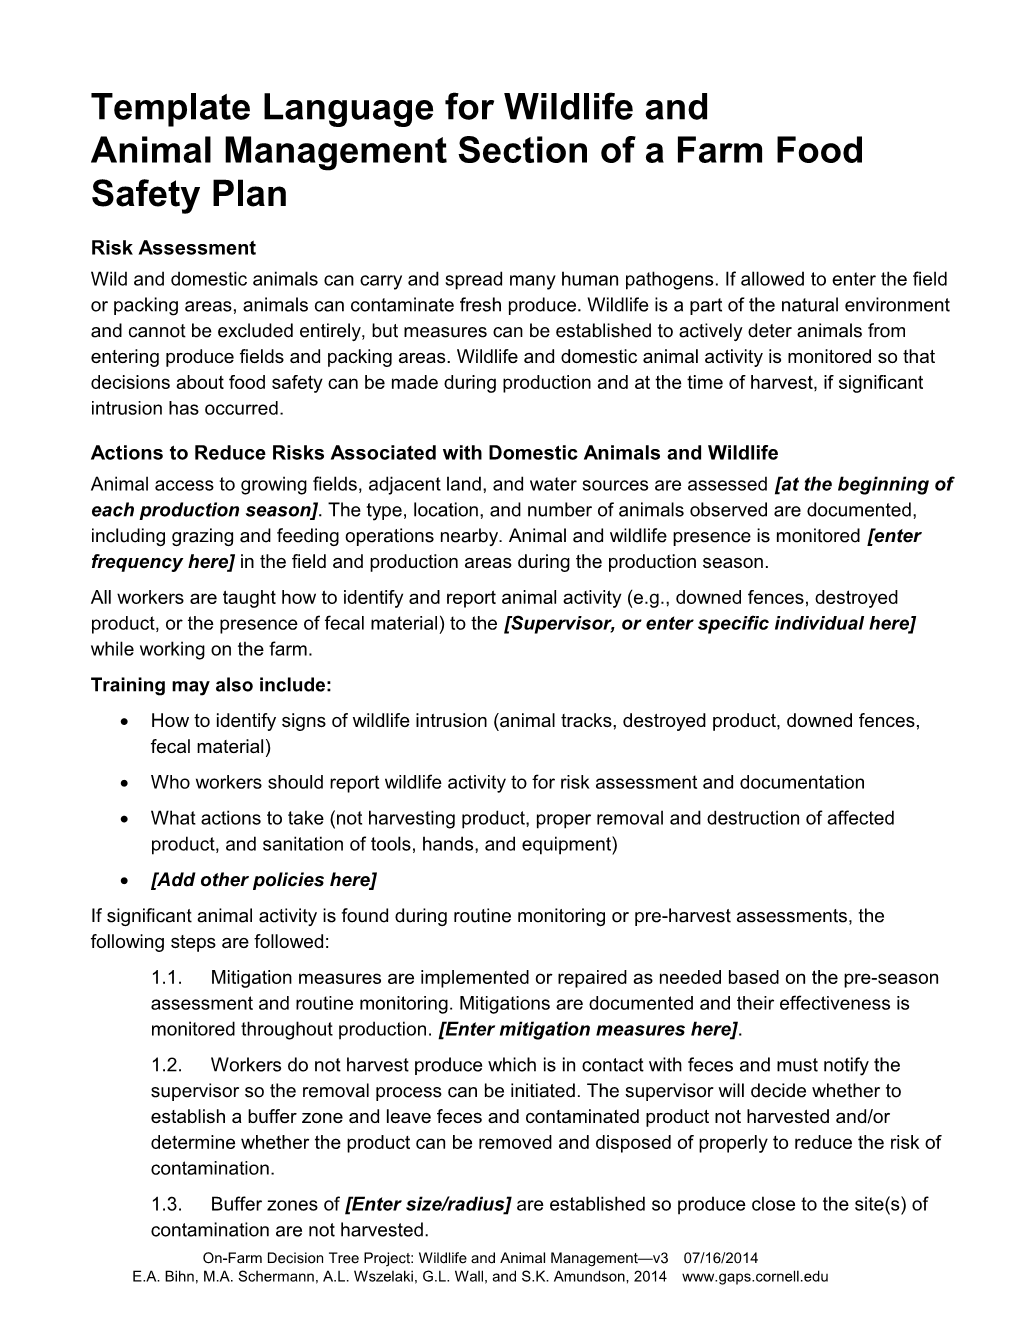 Template Language for Wildlife and Animal Management Section of a Farm Food Safety Plan